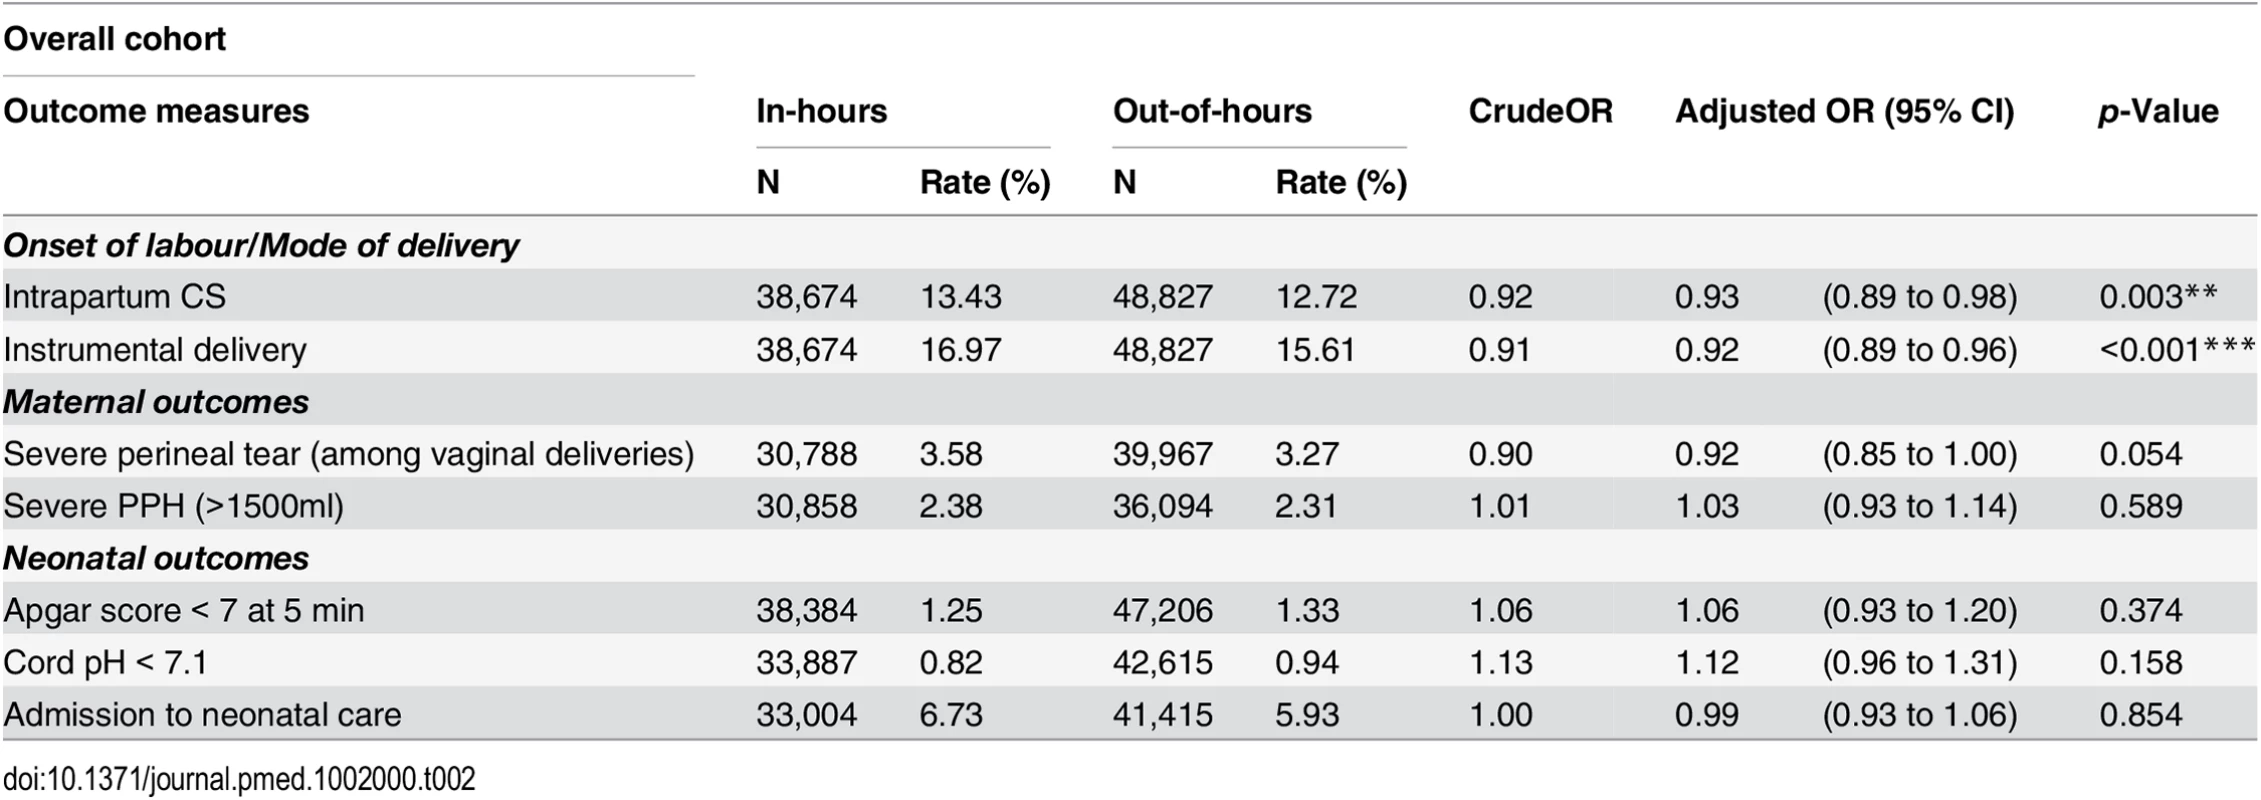 Crude and adjusted odds ratios for adverse perinatal outcomes, comparing in-hours and out-of-hours.